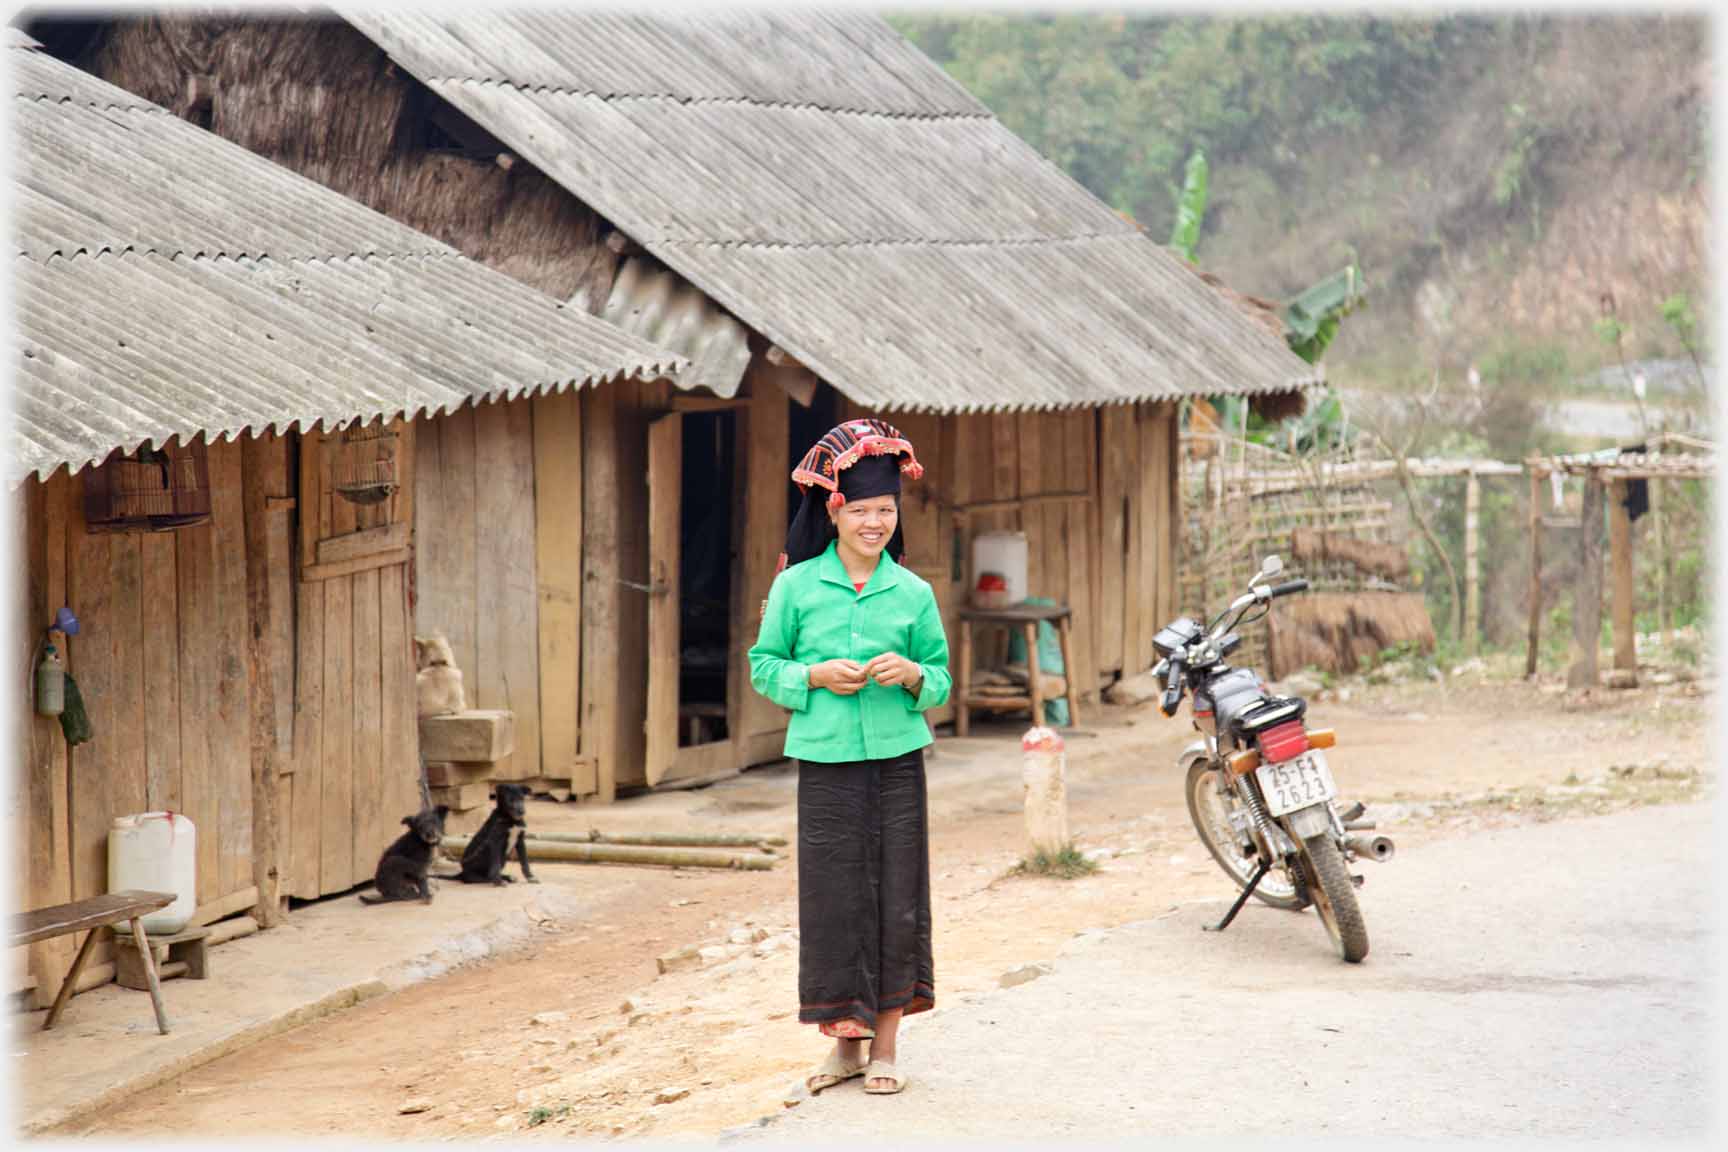 Young woman in bright green jacket and Hmung headdress staning in front of houses beside motorbike and two dogs.